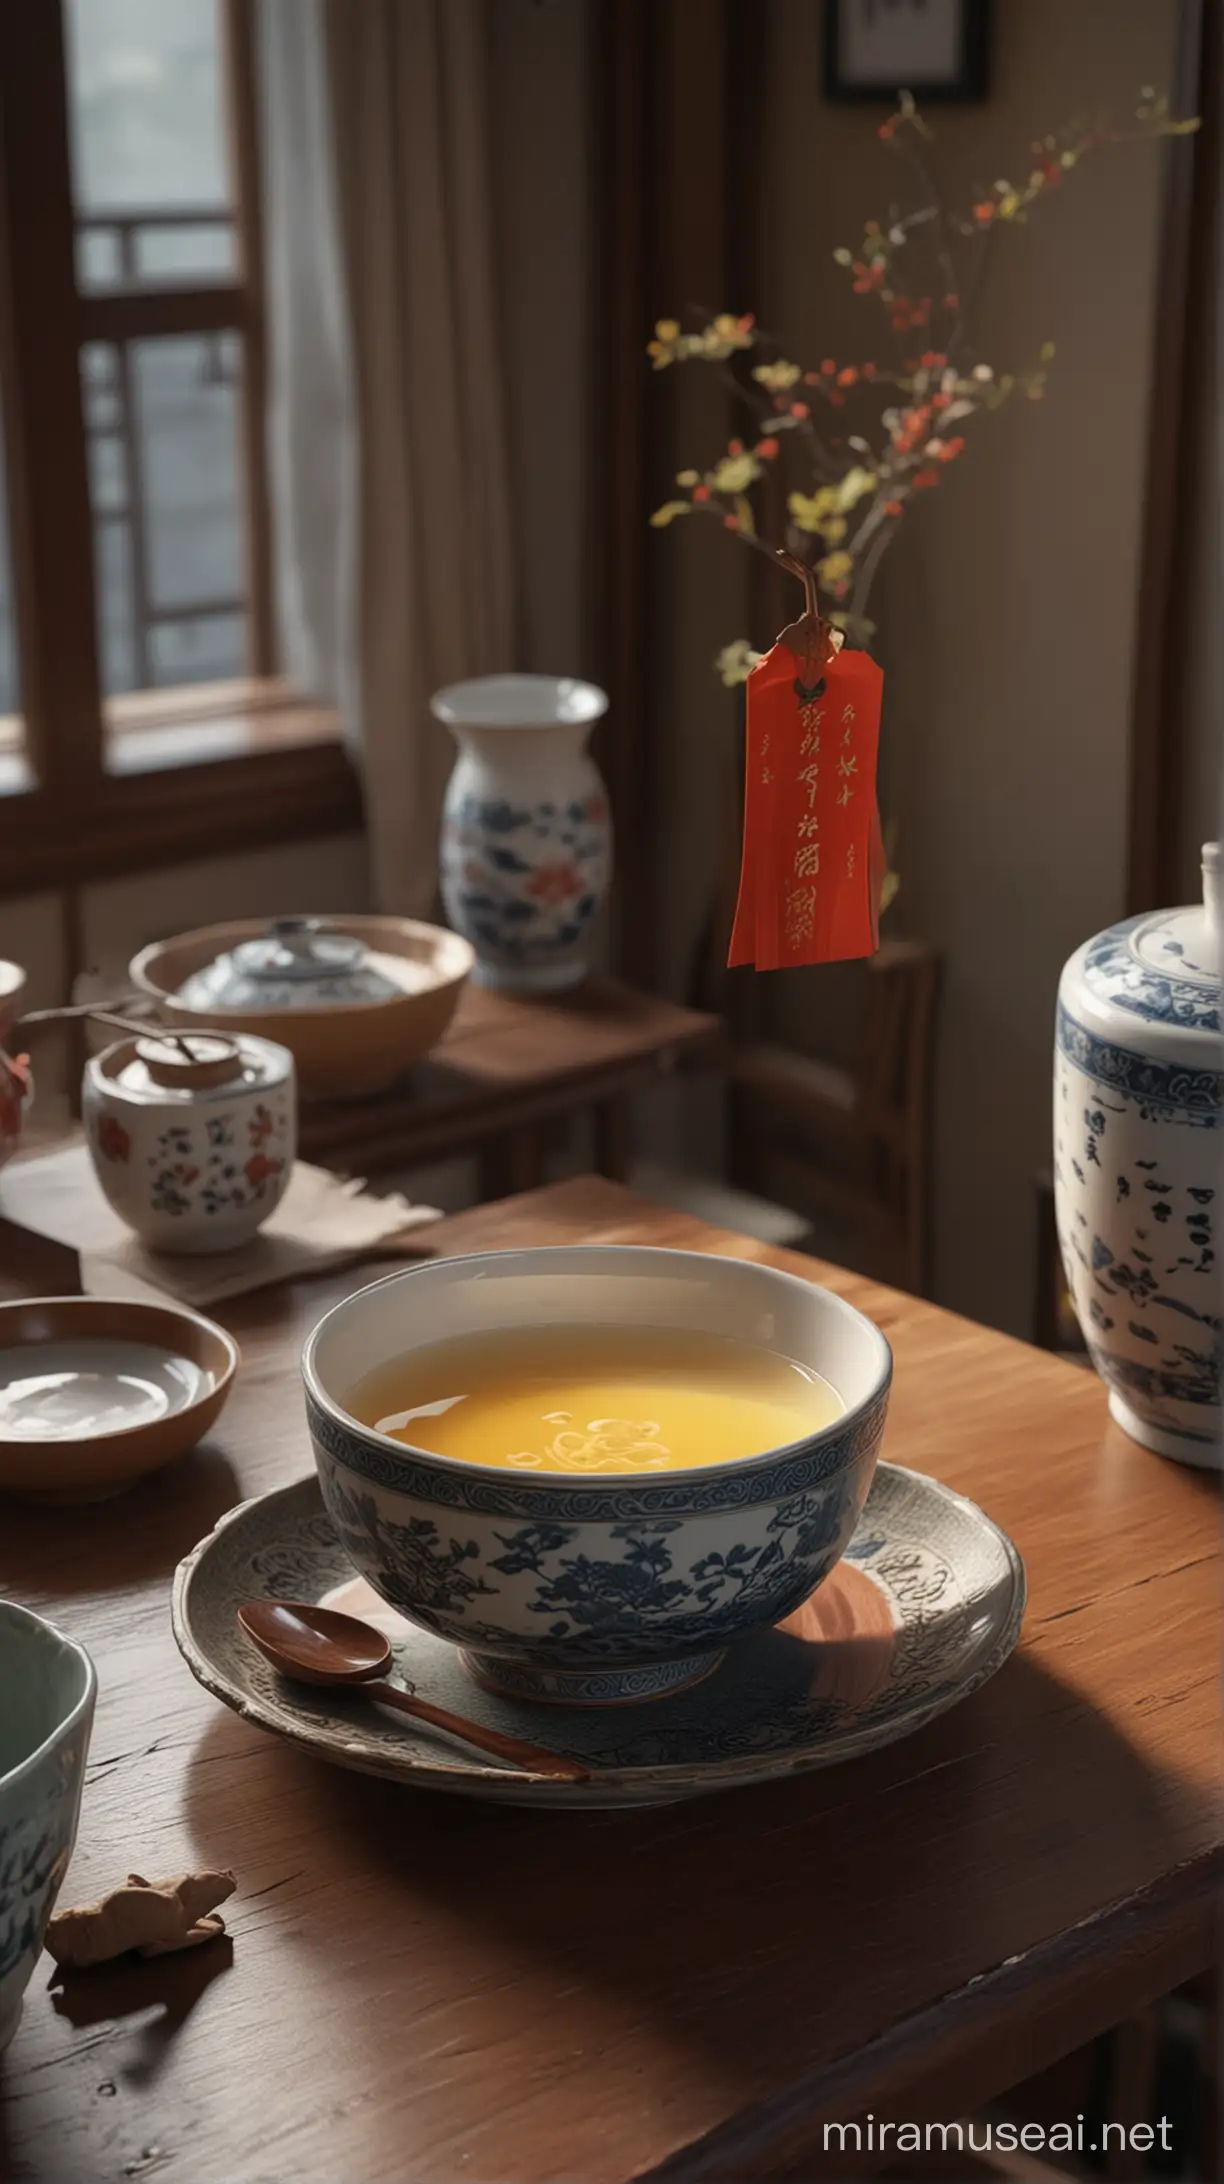 Realistic ChineseStyle Cup on Table with Petcore and Cabincore Elements